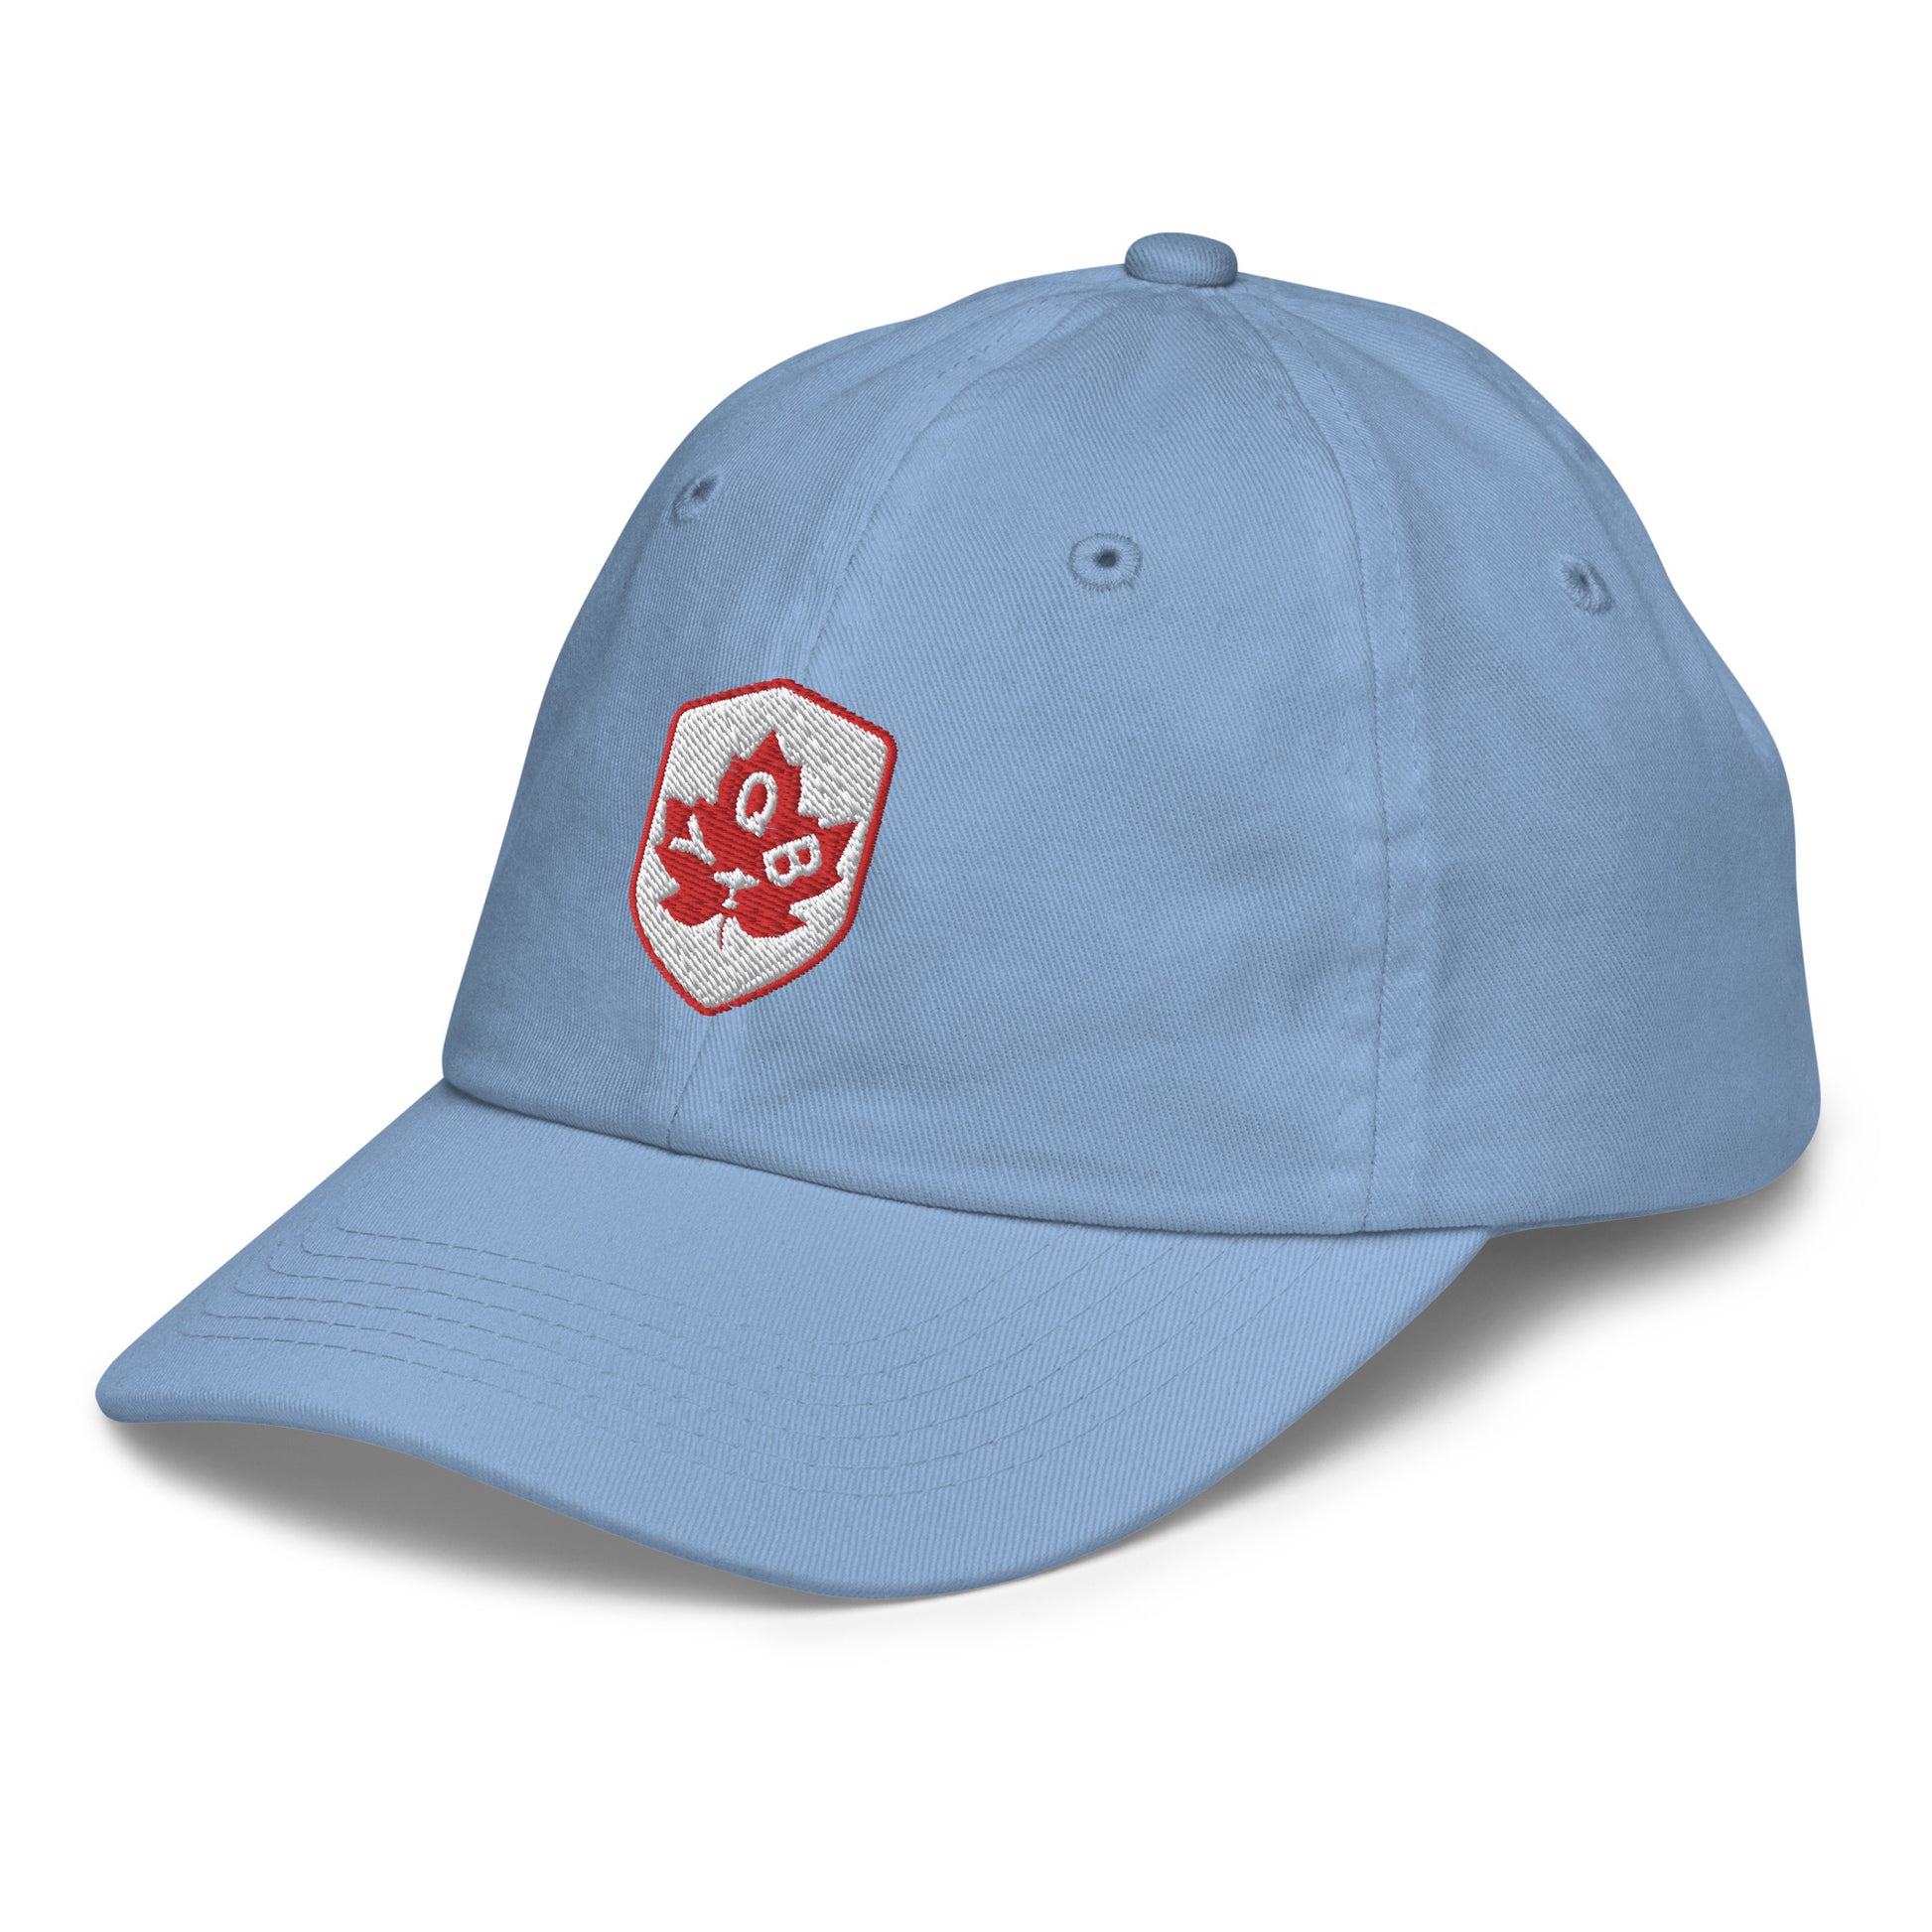 Maple Leaf Kid's Cap - Red/White • YQB Quebec City • YHM Designs - Image 21